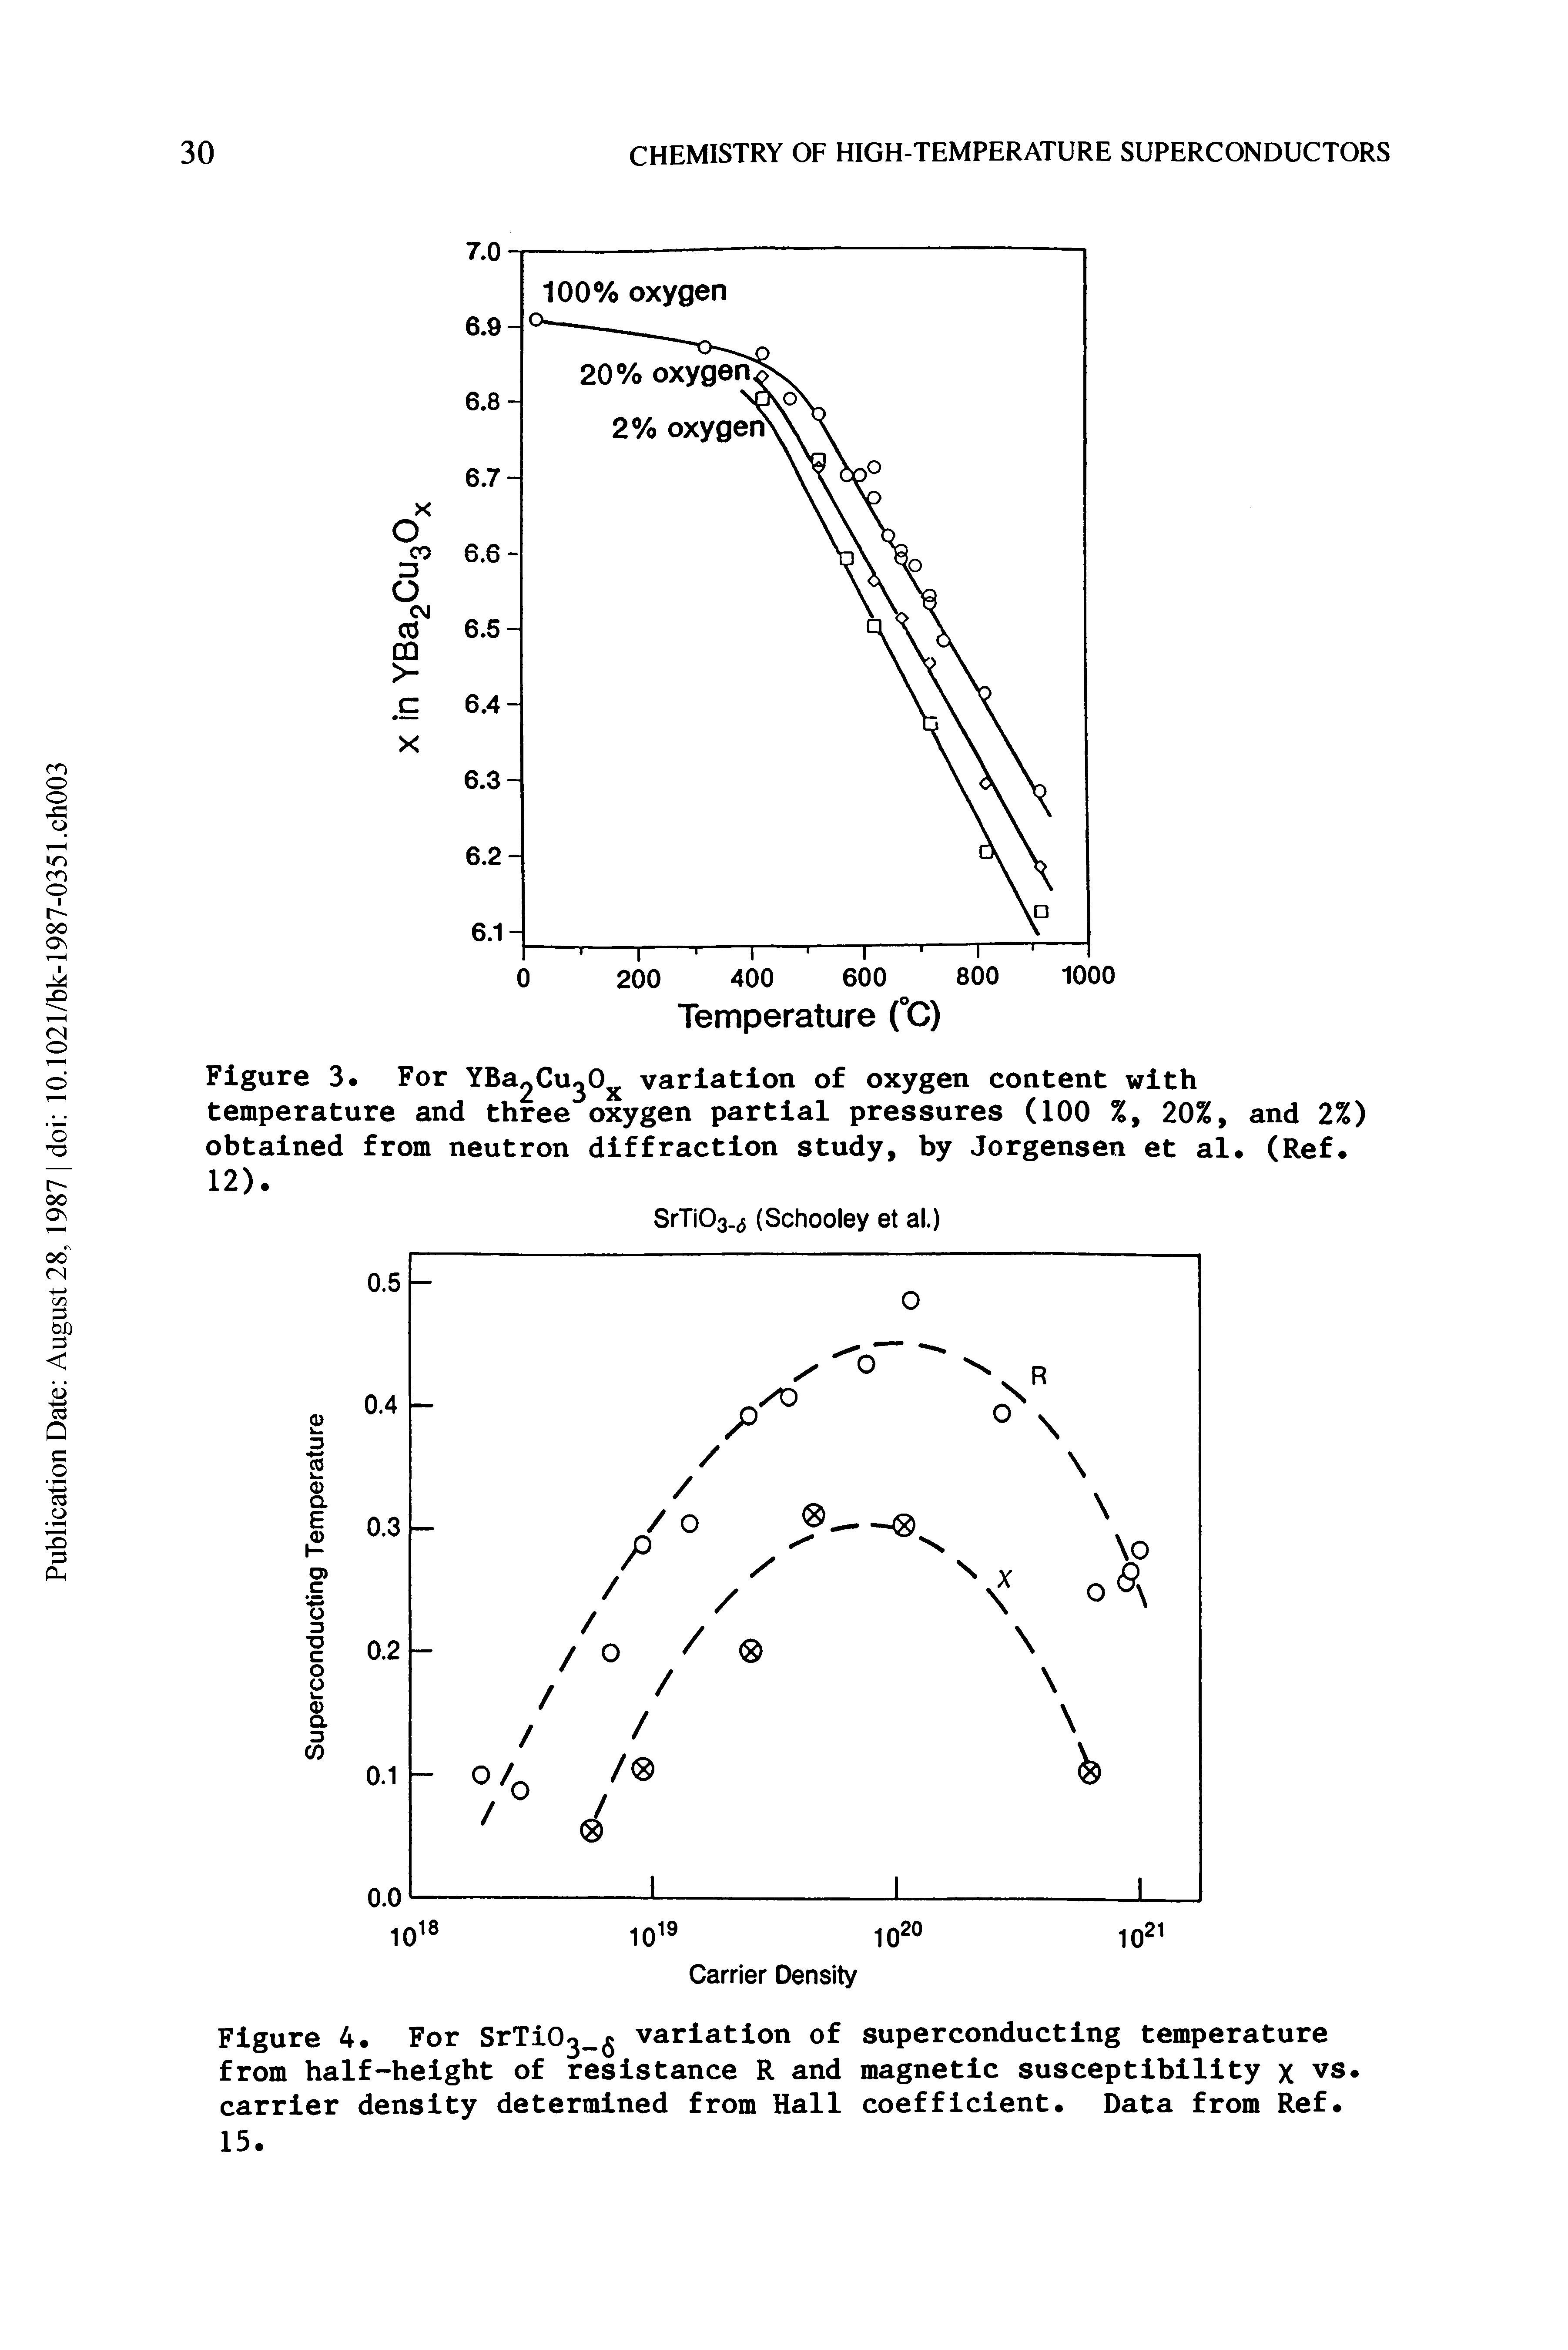 Figure 4. For SrTiO variation of superconducting temperature from half-height of resistance R and magnetic susceptibility x vs. carrier density determined from Hall coefficient. Data from Ref.